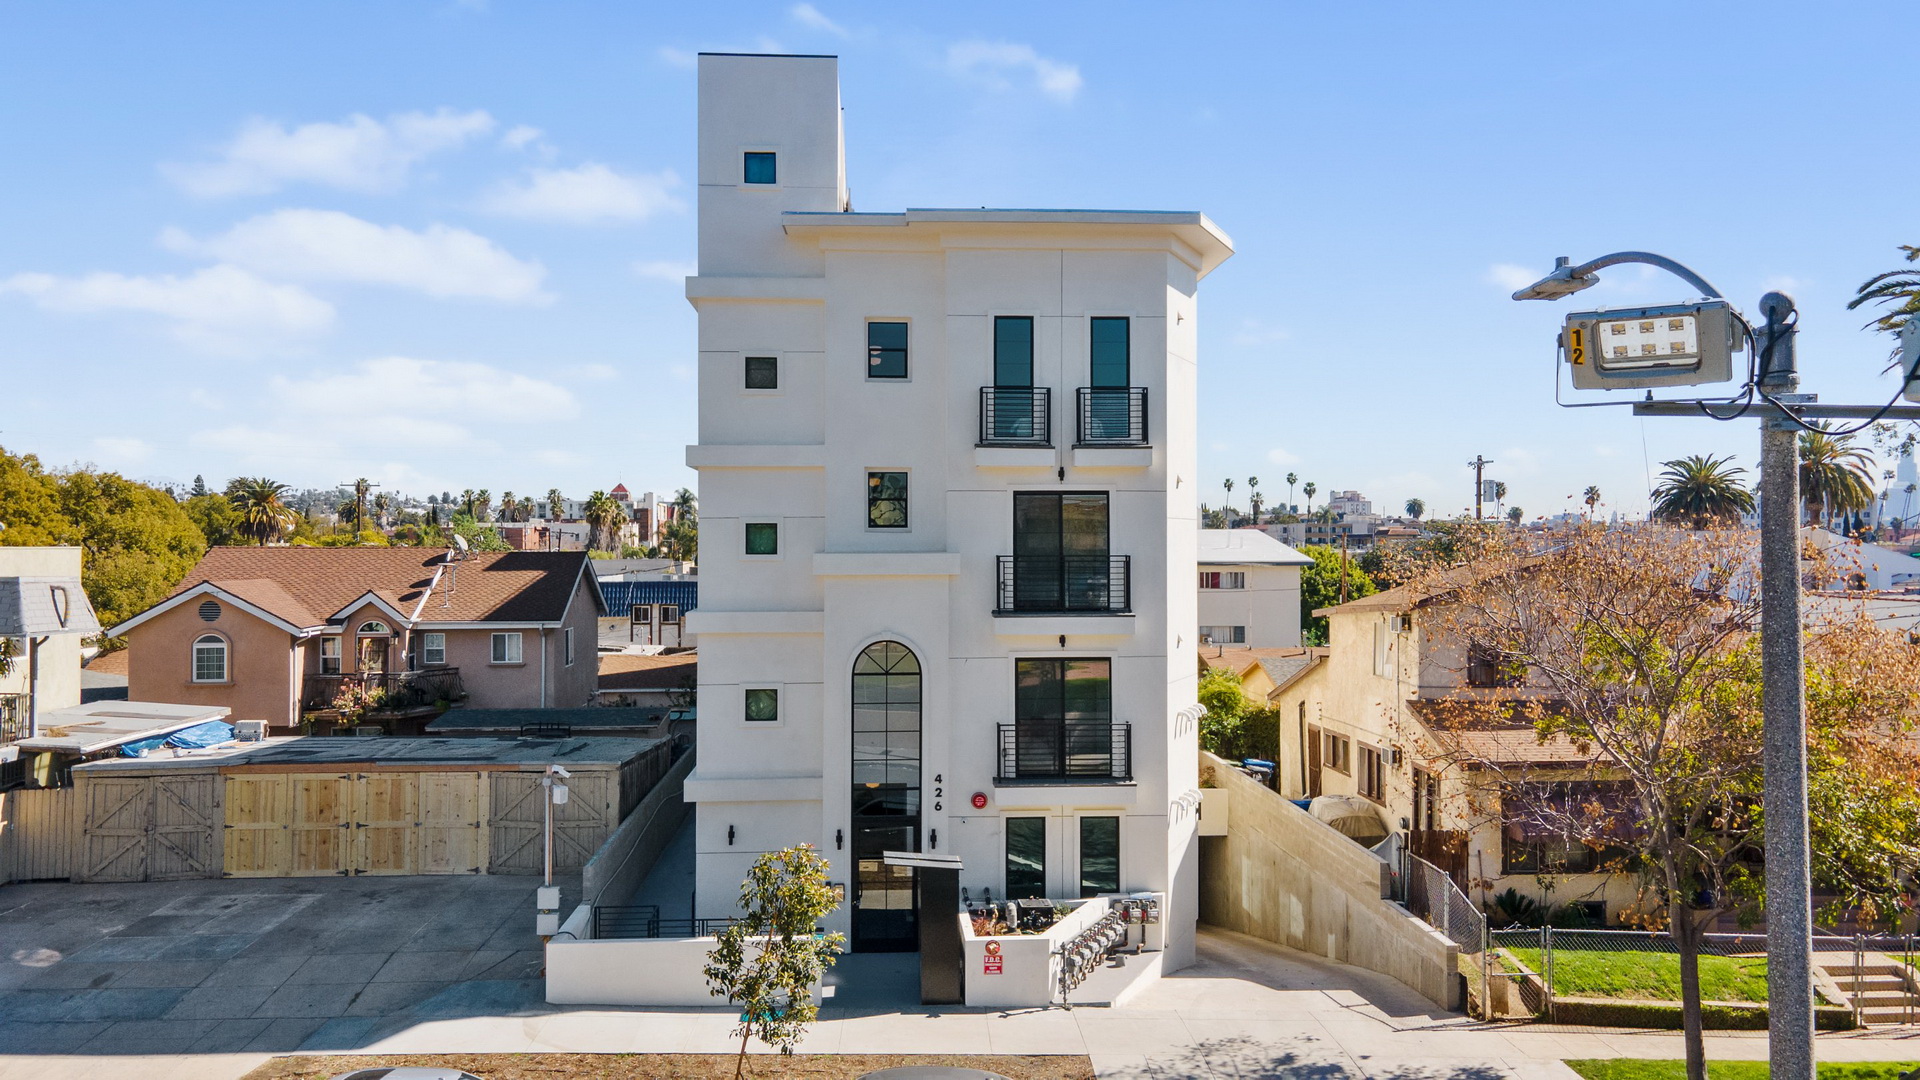 Townhomes for rent in Koreatown